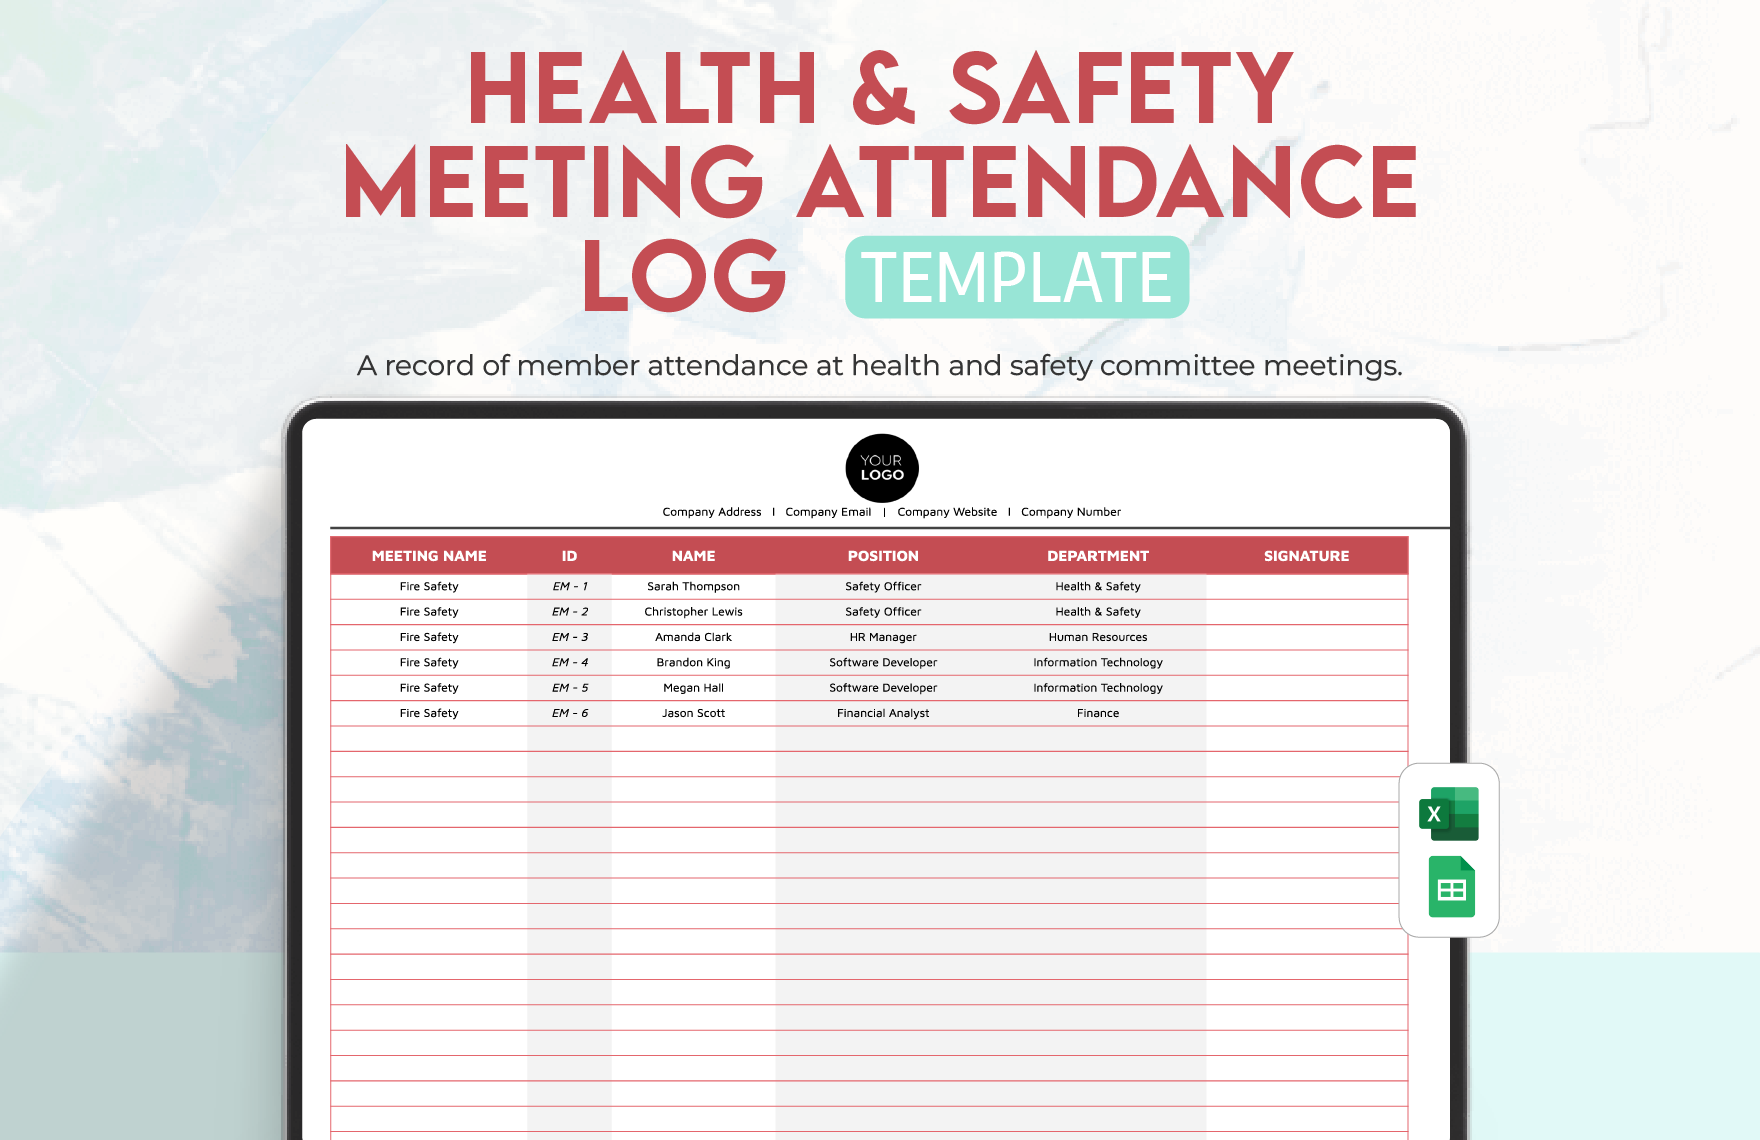 Health & Safety Meeting Attendance Log Template in Excel, Google Sheets